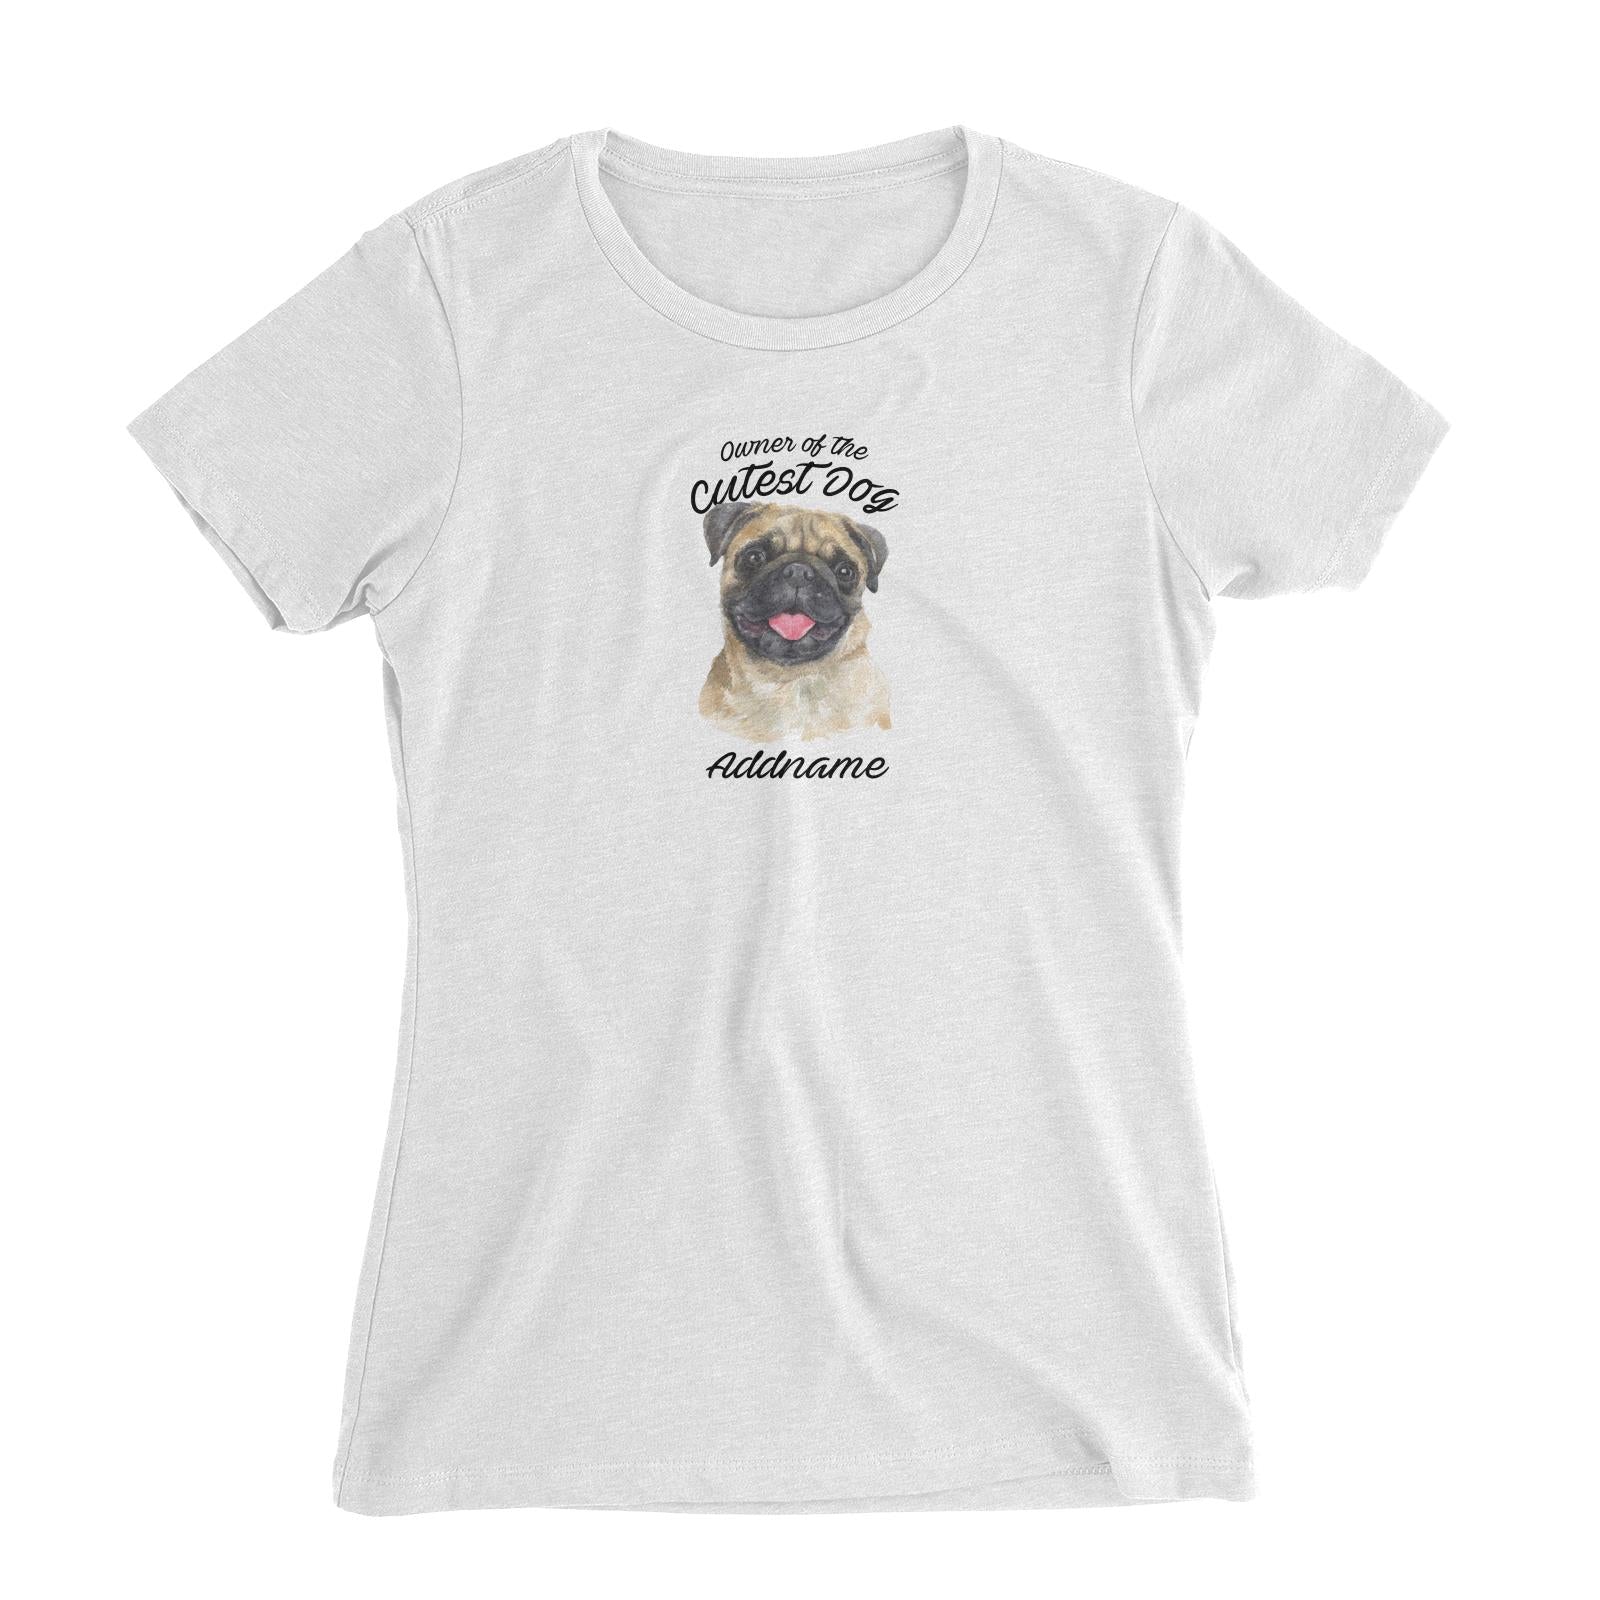 Watercolor Dog Owner Of The Cutest Dog Pug Addname Women's Slim Fit T-Shirt